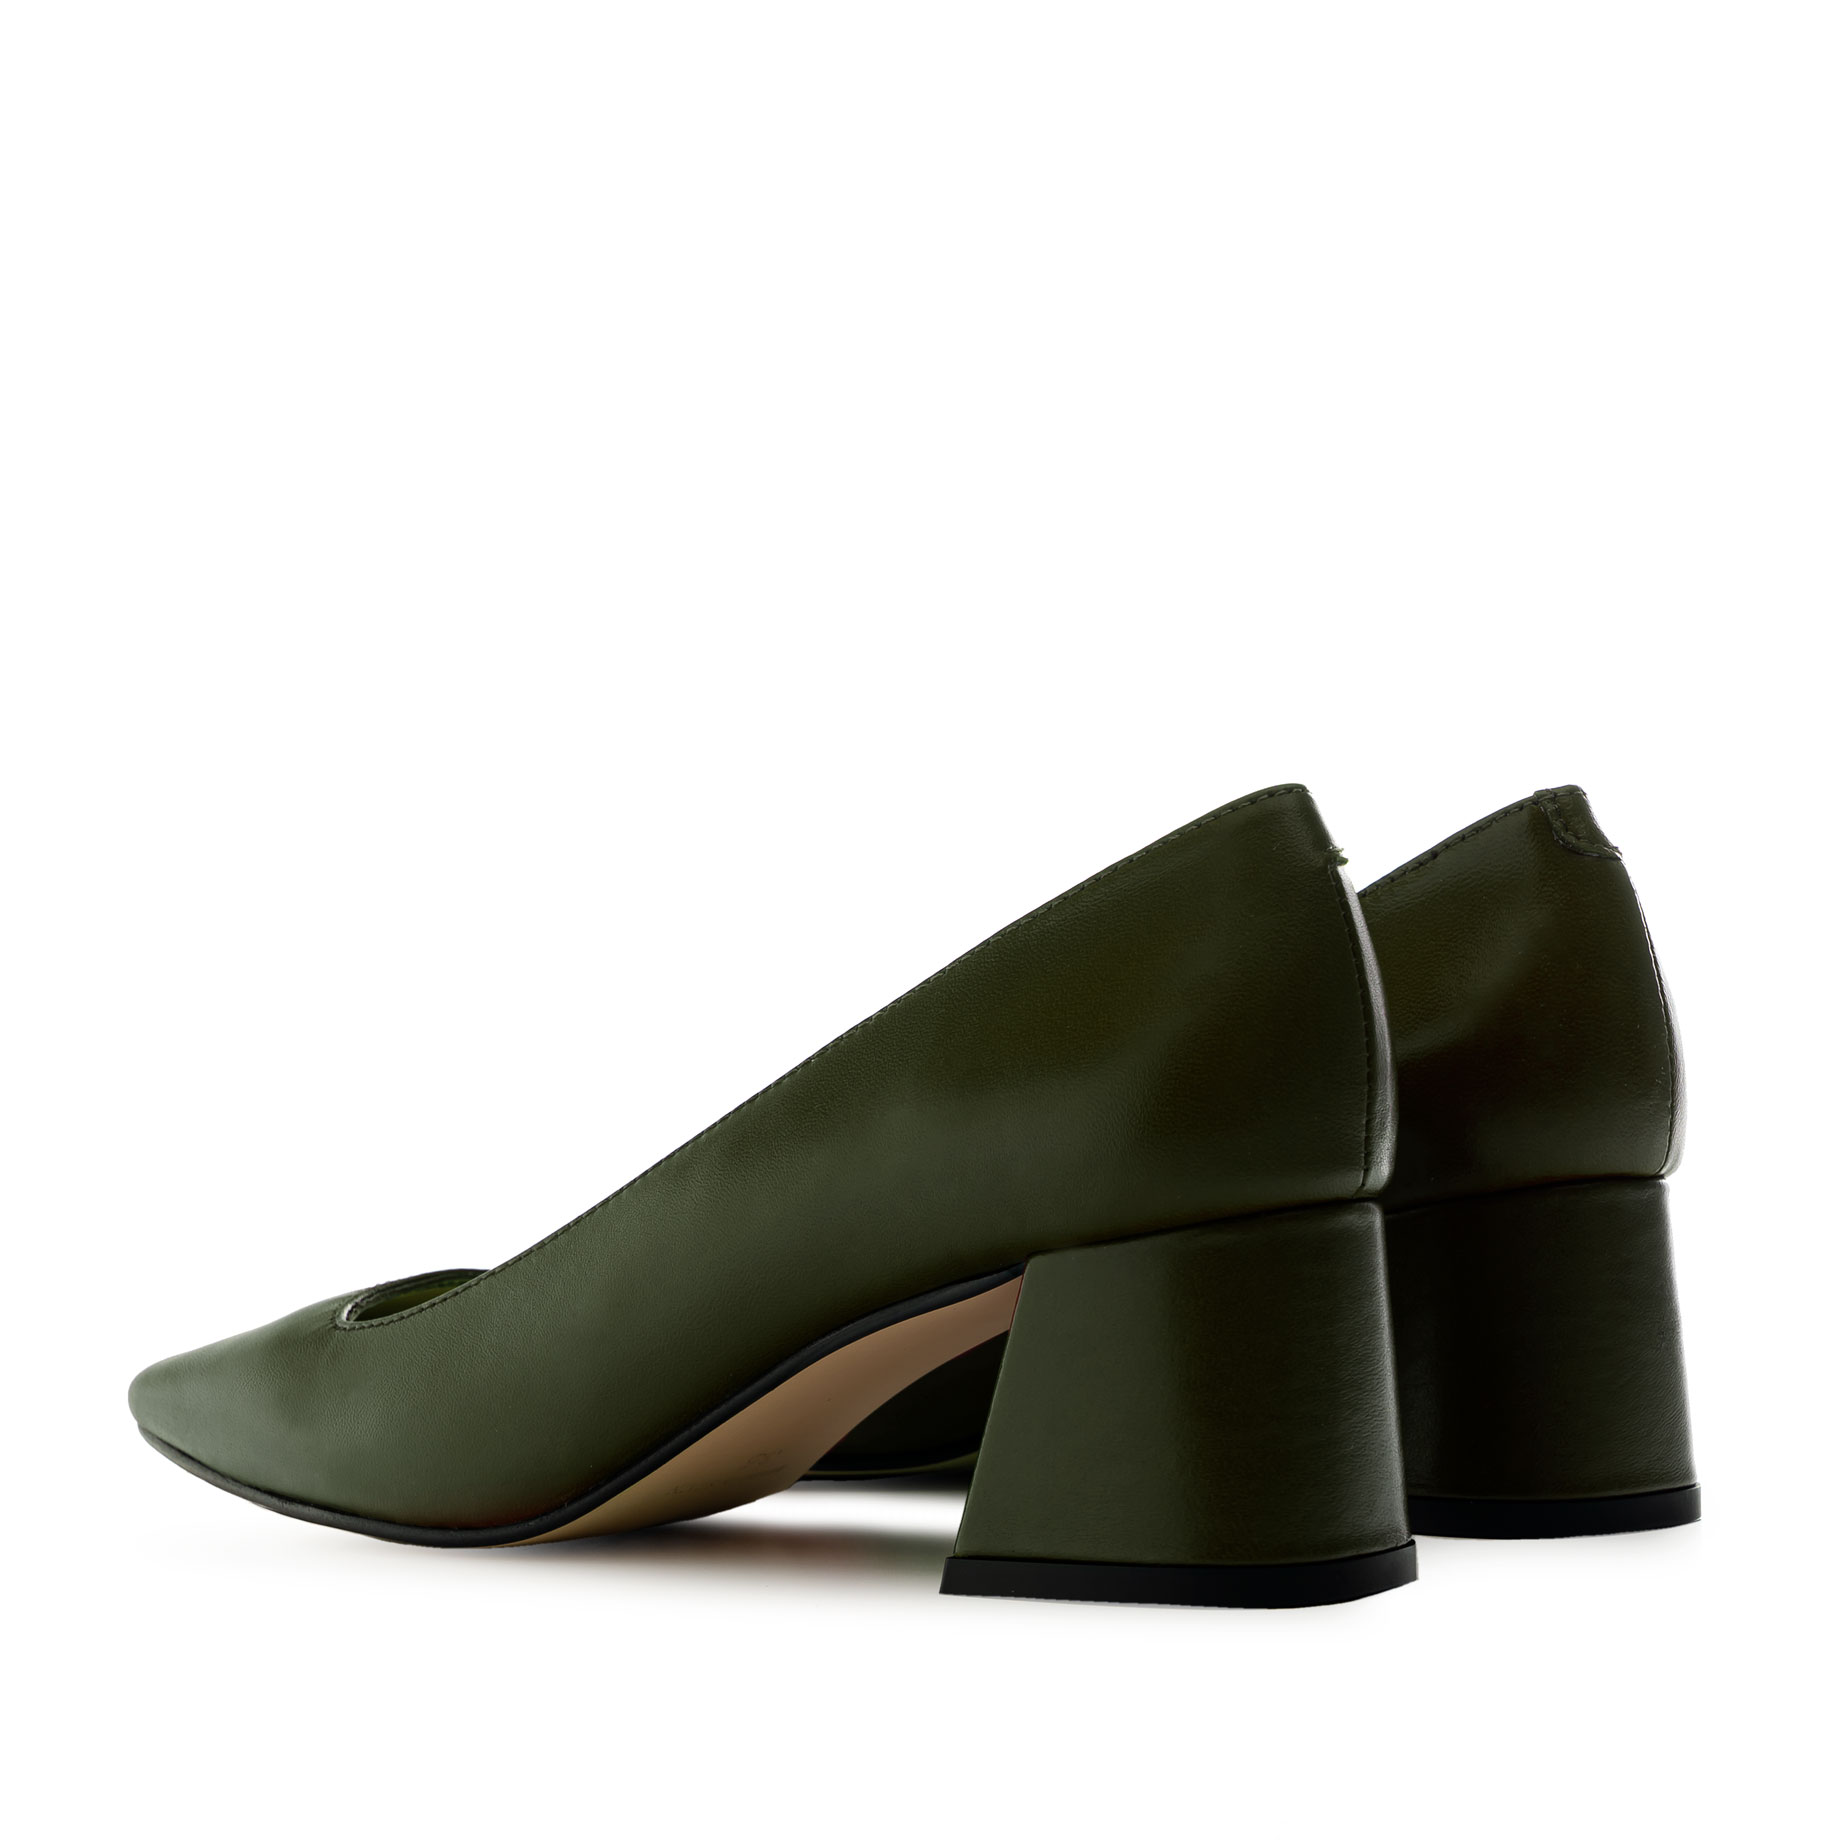 Court Shoes in Khaki Leather 